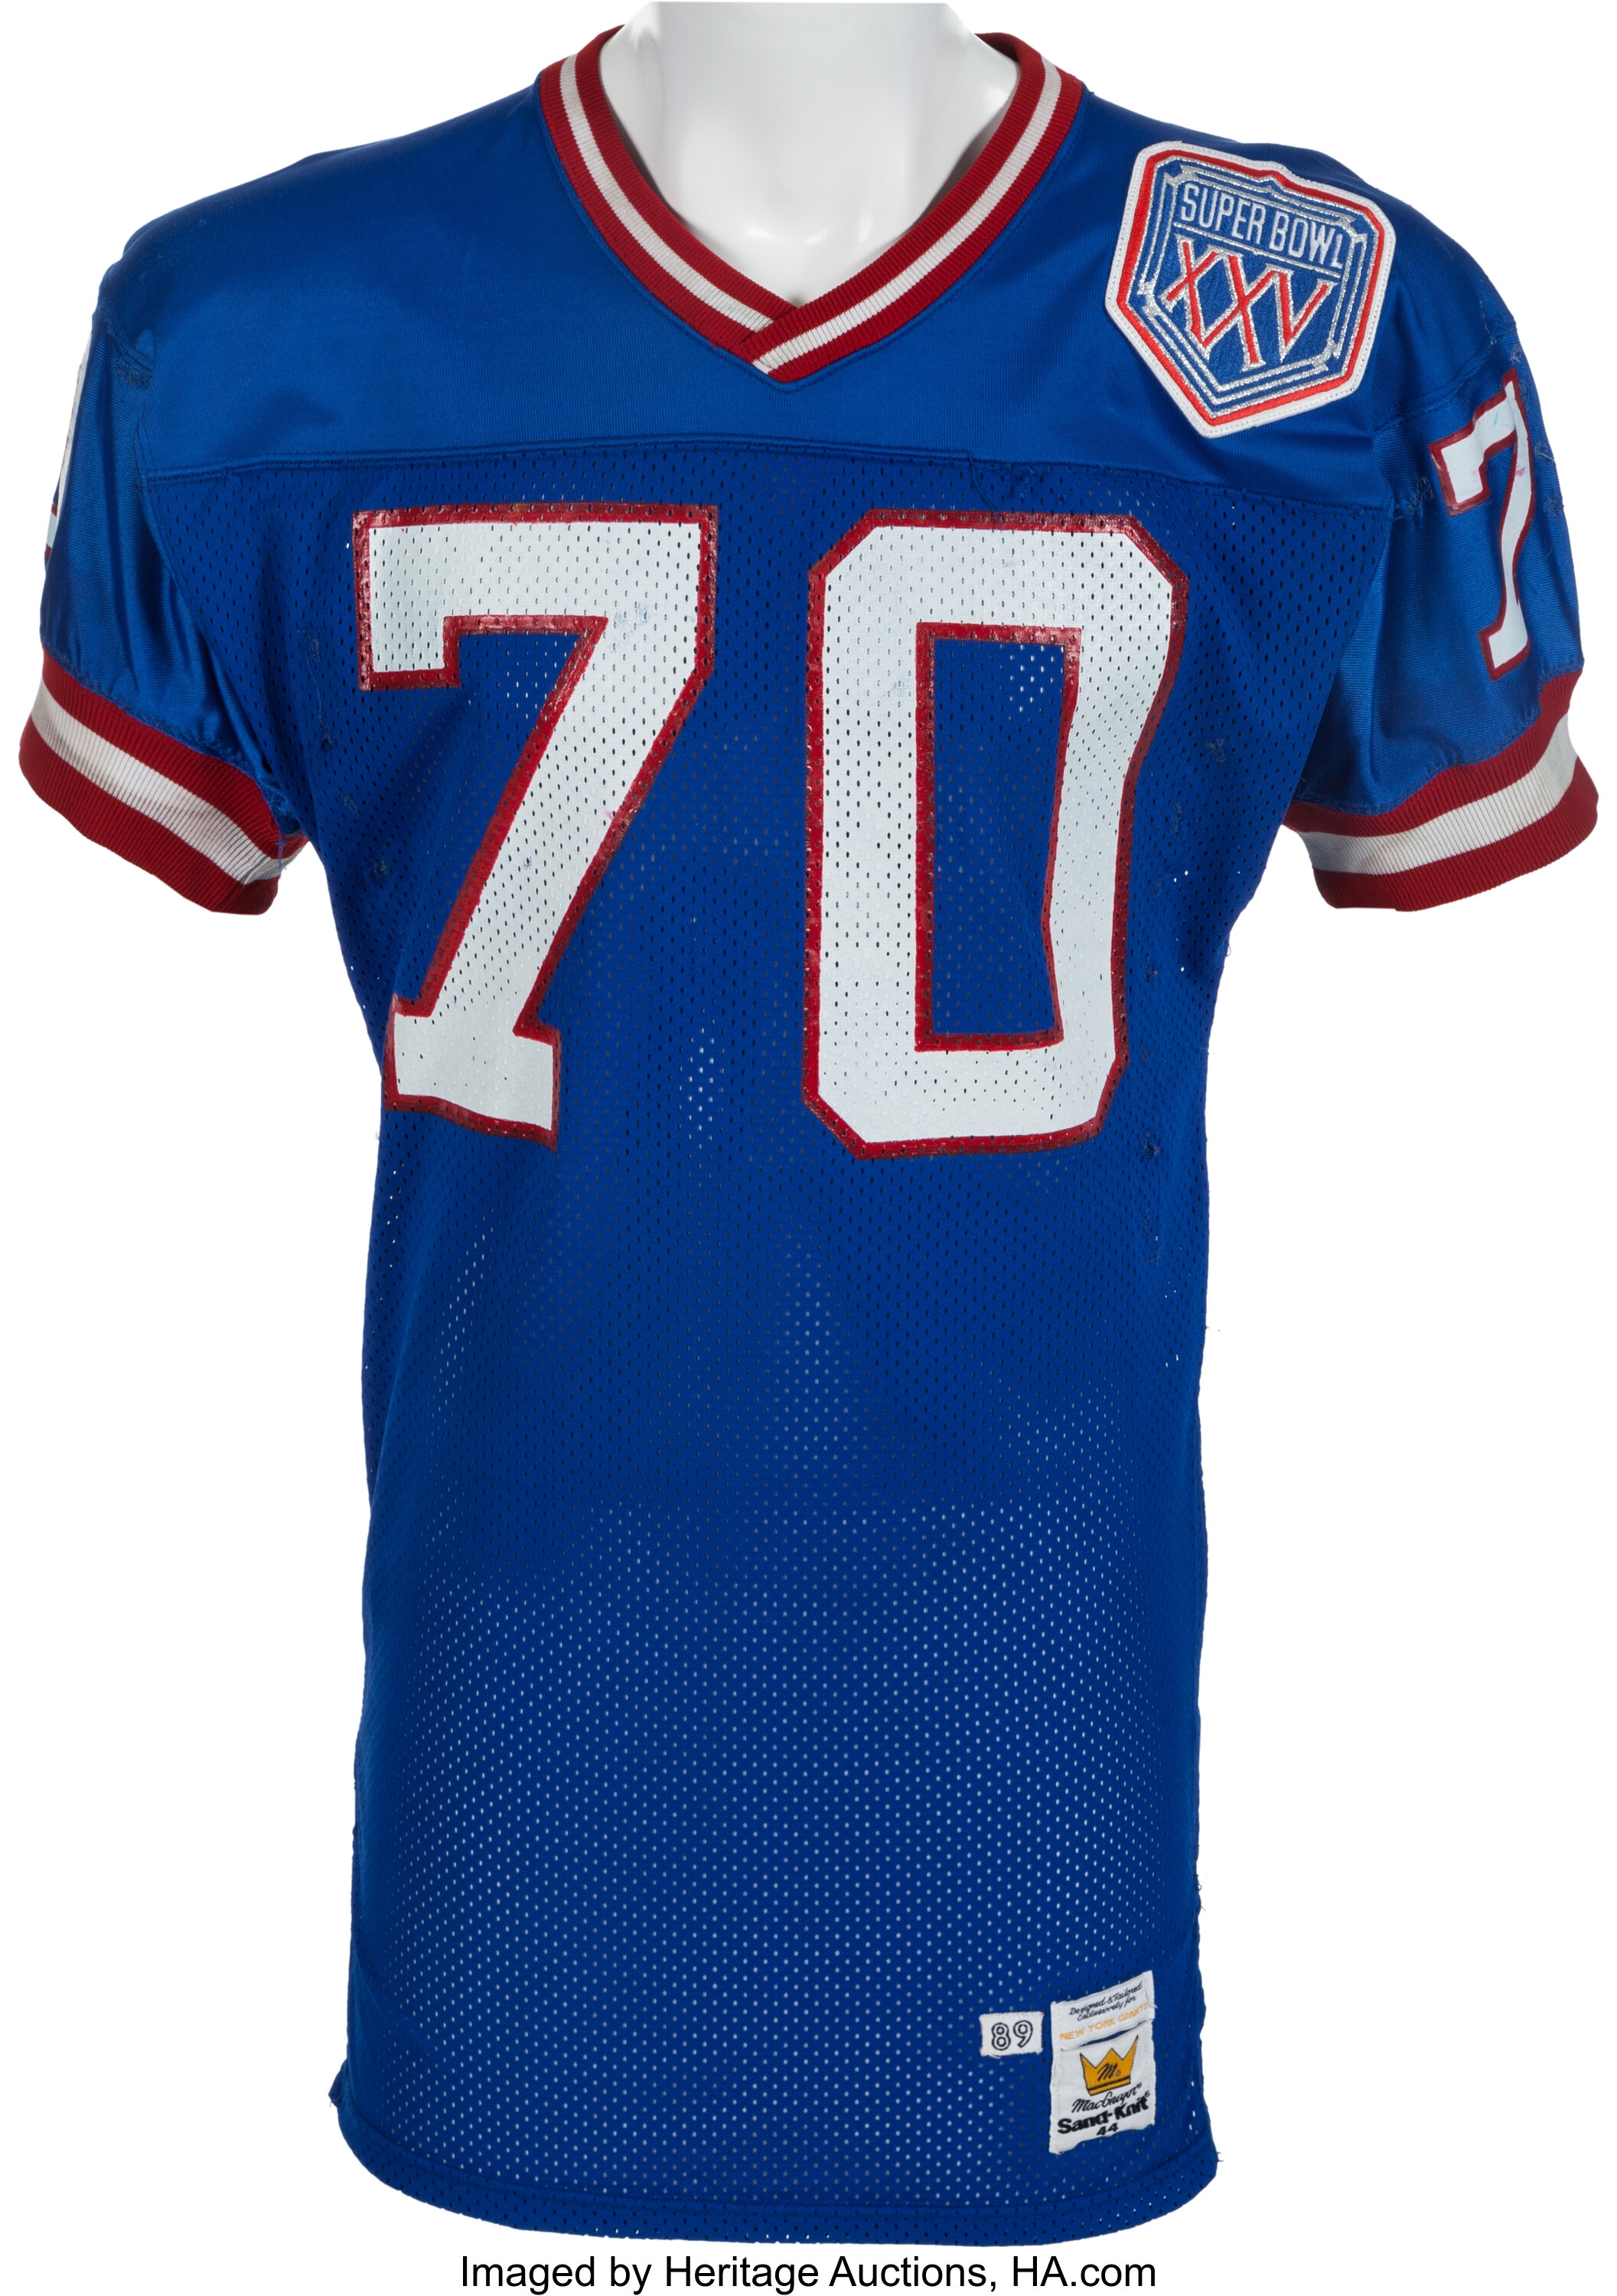 99.new York Giants Jersey History Clearance -   1693499754